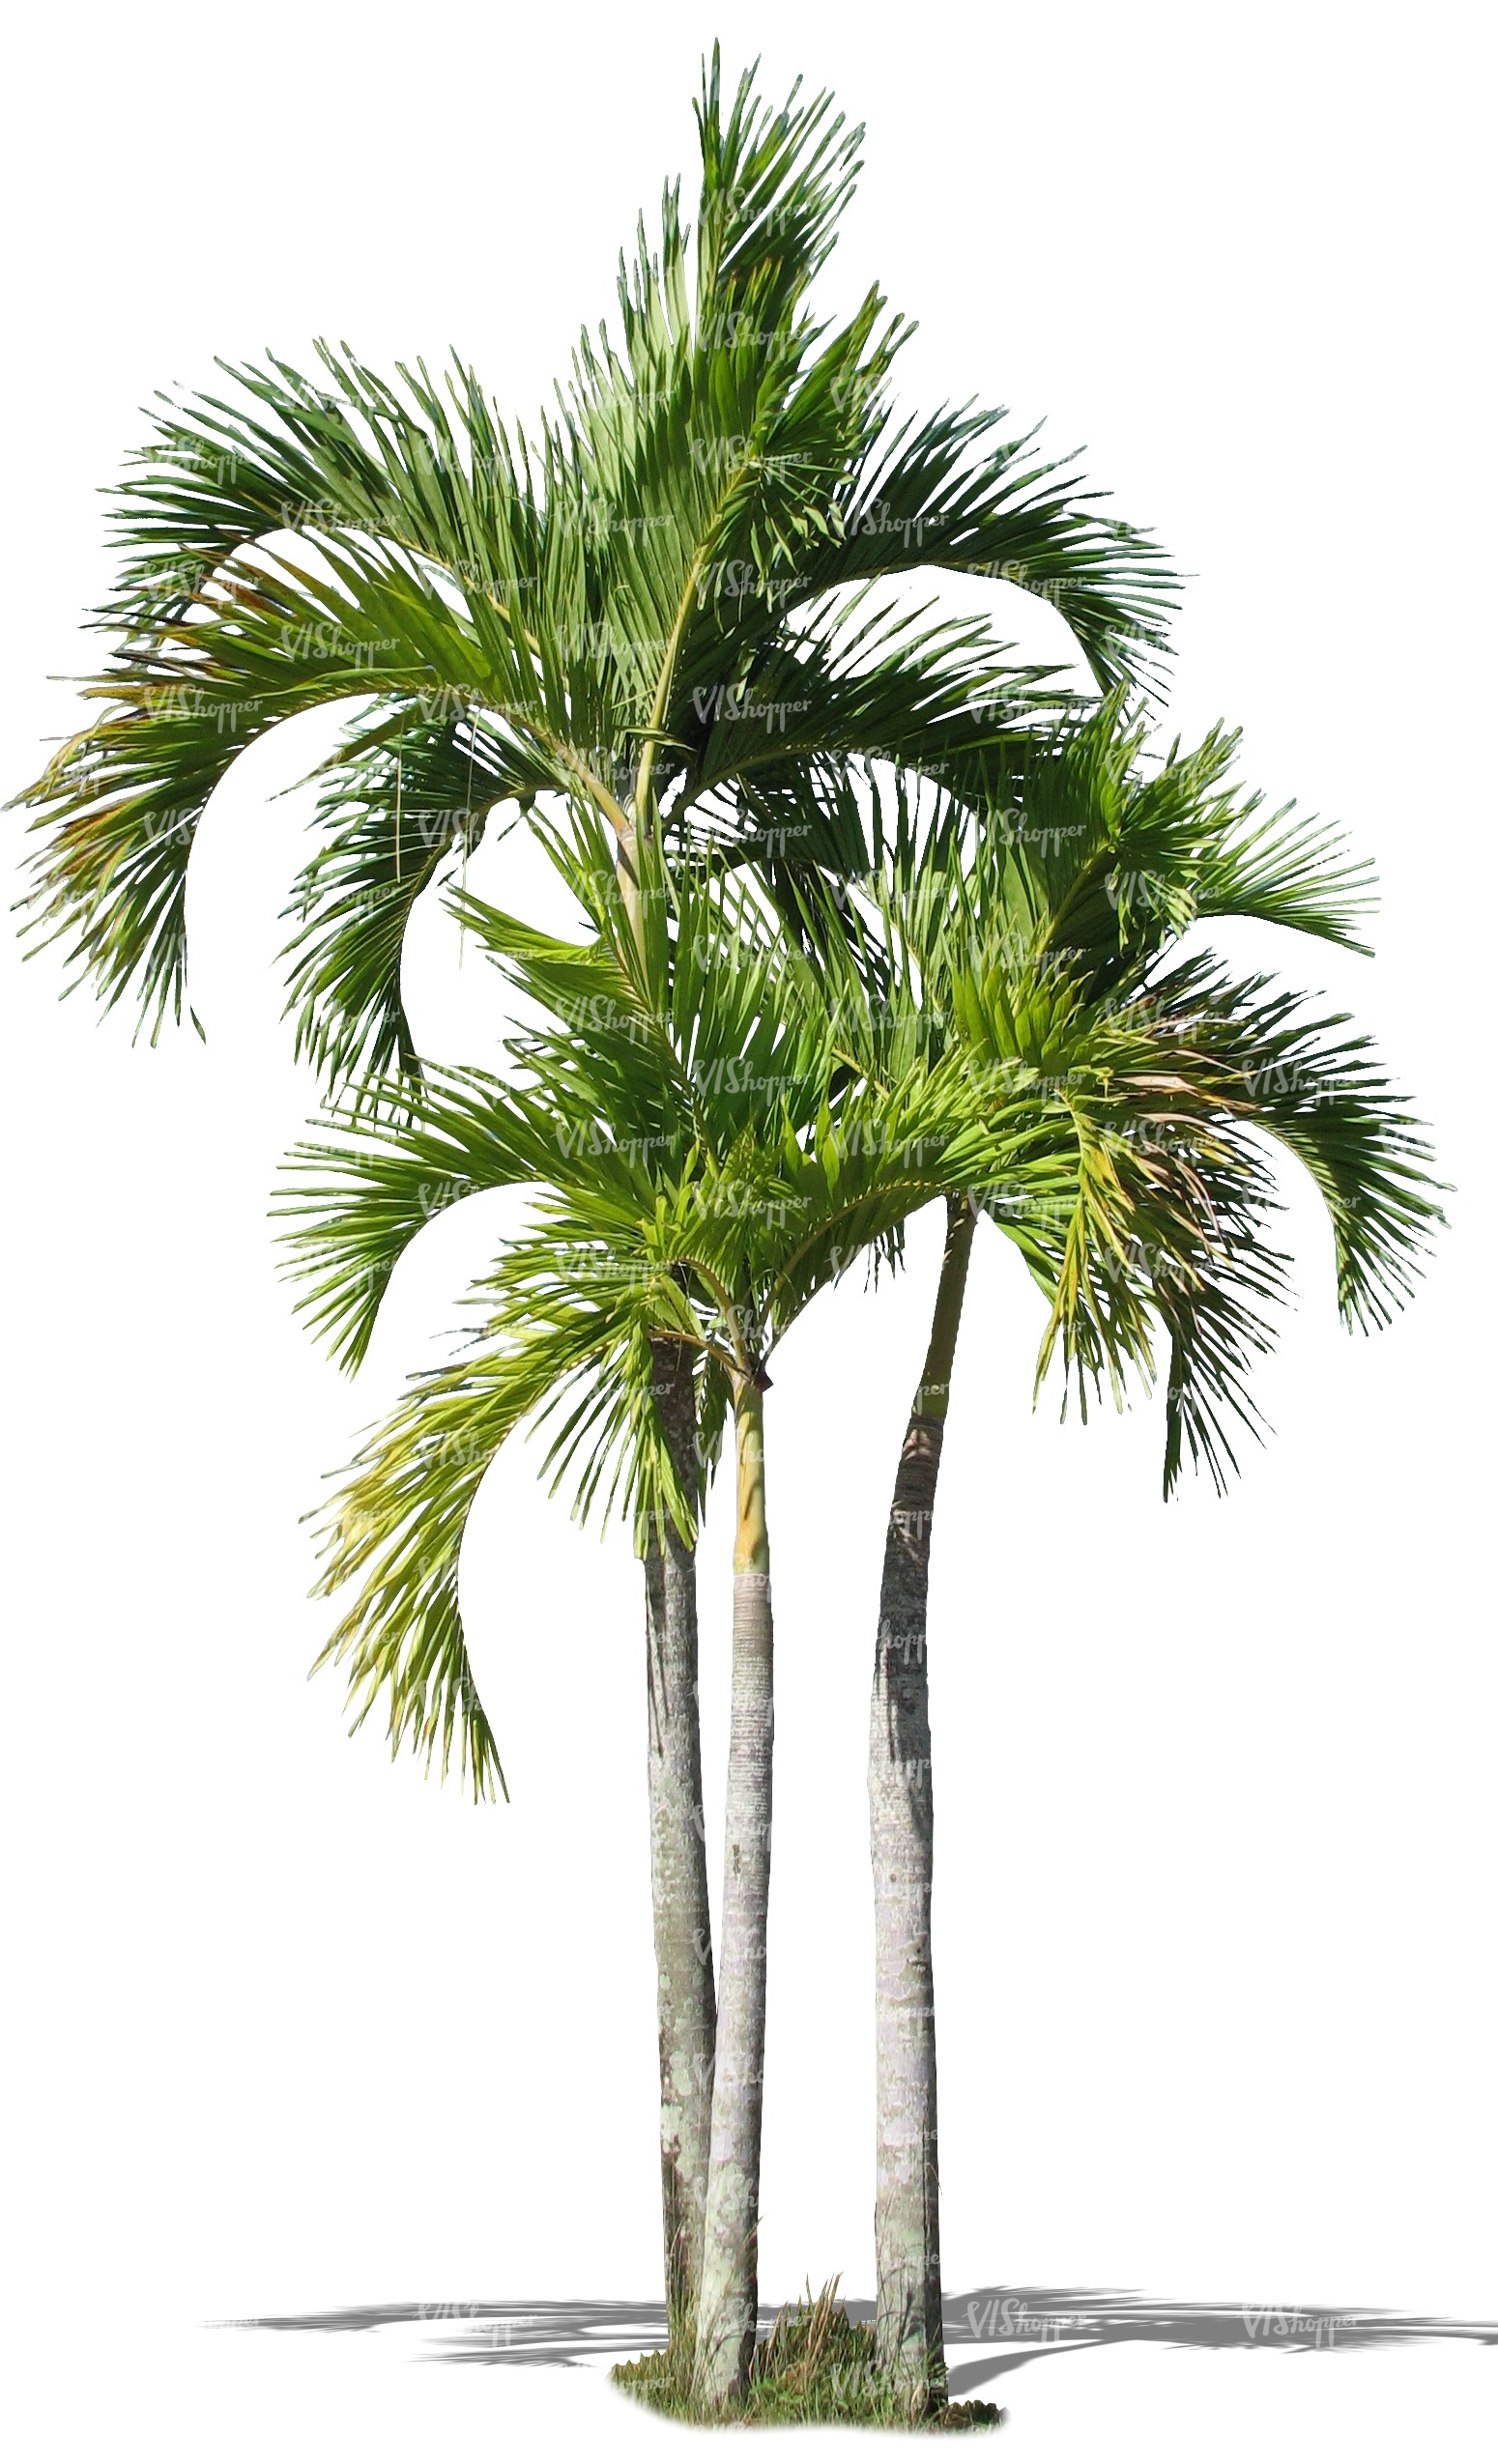 three cut out palm trees - cut out trees and plants - VIShopper